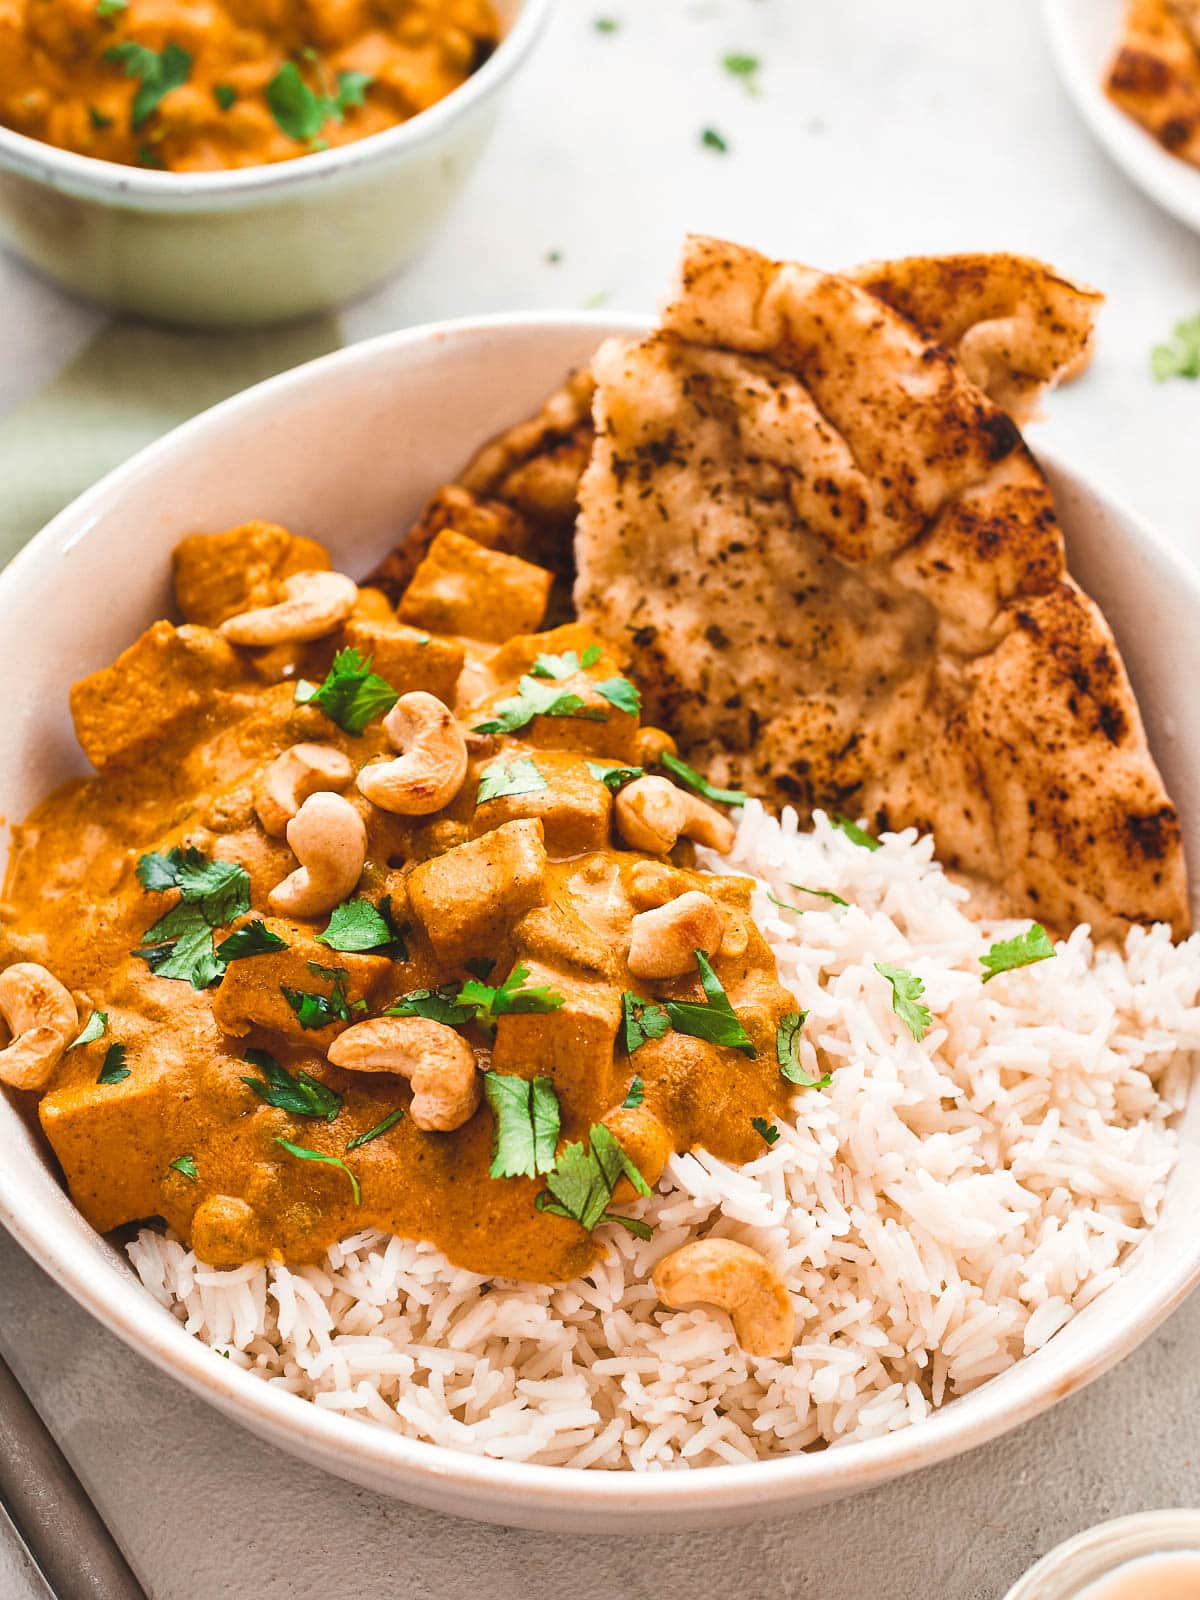 Vegan shahi korma in a bowl with rice and naan